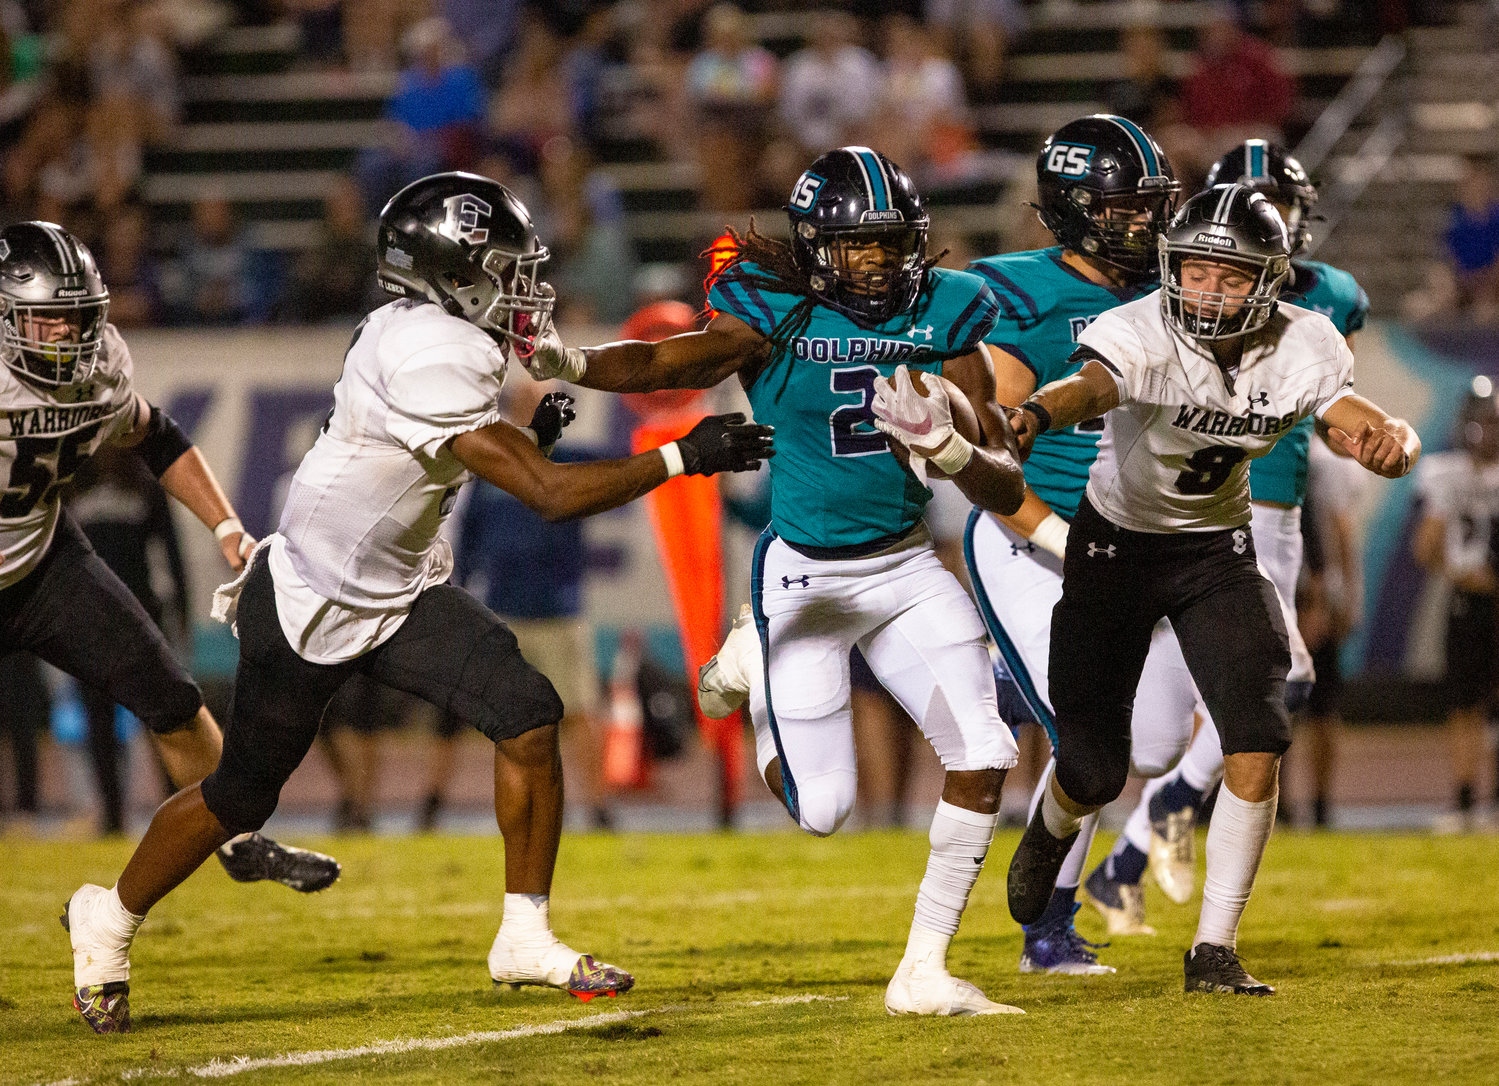 Dolphin junior Ronnie Royal stiff arms a defender while maintaining his balance to fight for extra yards on a run against the Elberta Warriors Thursday night at home. The 49-3 win qualified Gulf Shores for a playoff berth.